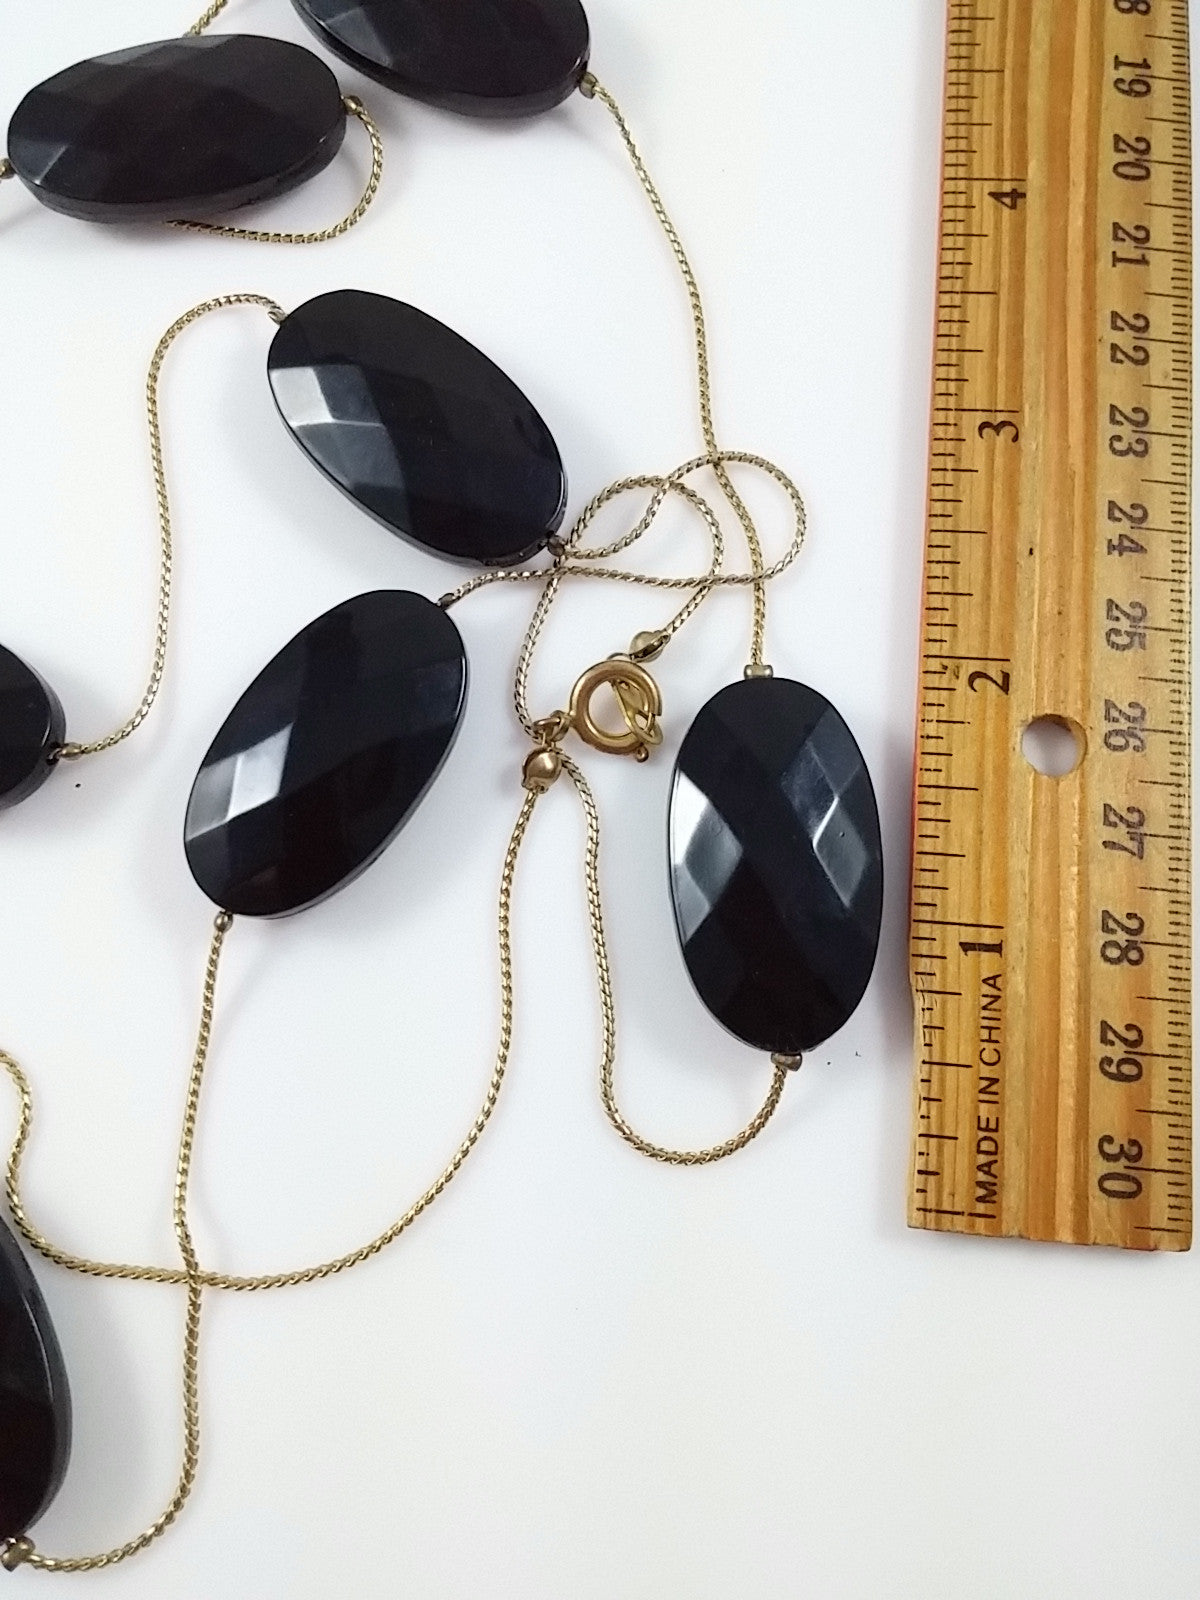 Vintage Necklace Black Faceted Oblong Beads w/ Gold Tone Chain - Dirty 30 Vintage | Vintage Clothing, Vintage Jewelry, Vintage Accessories